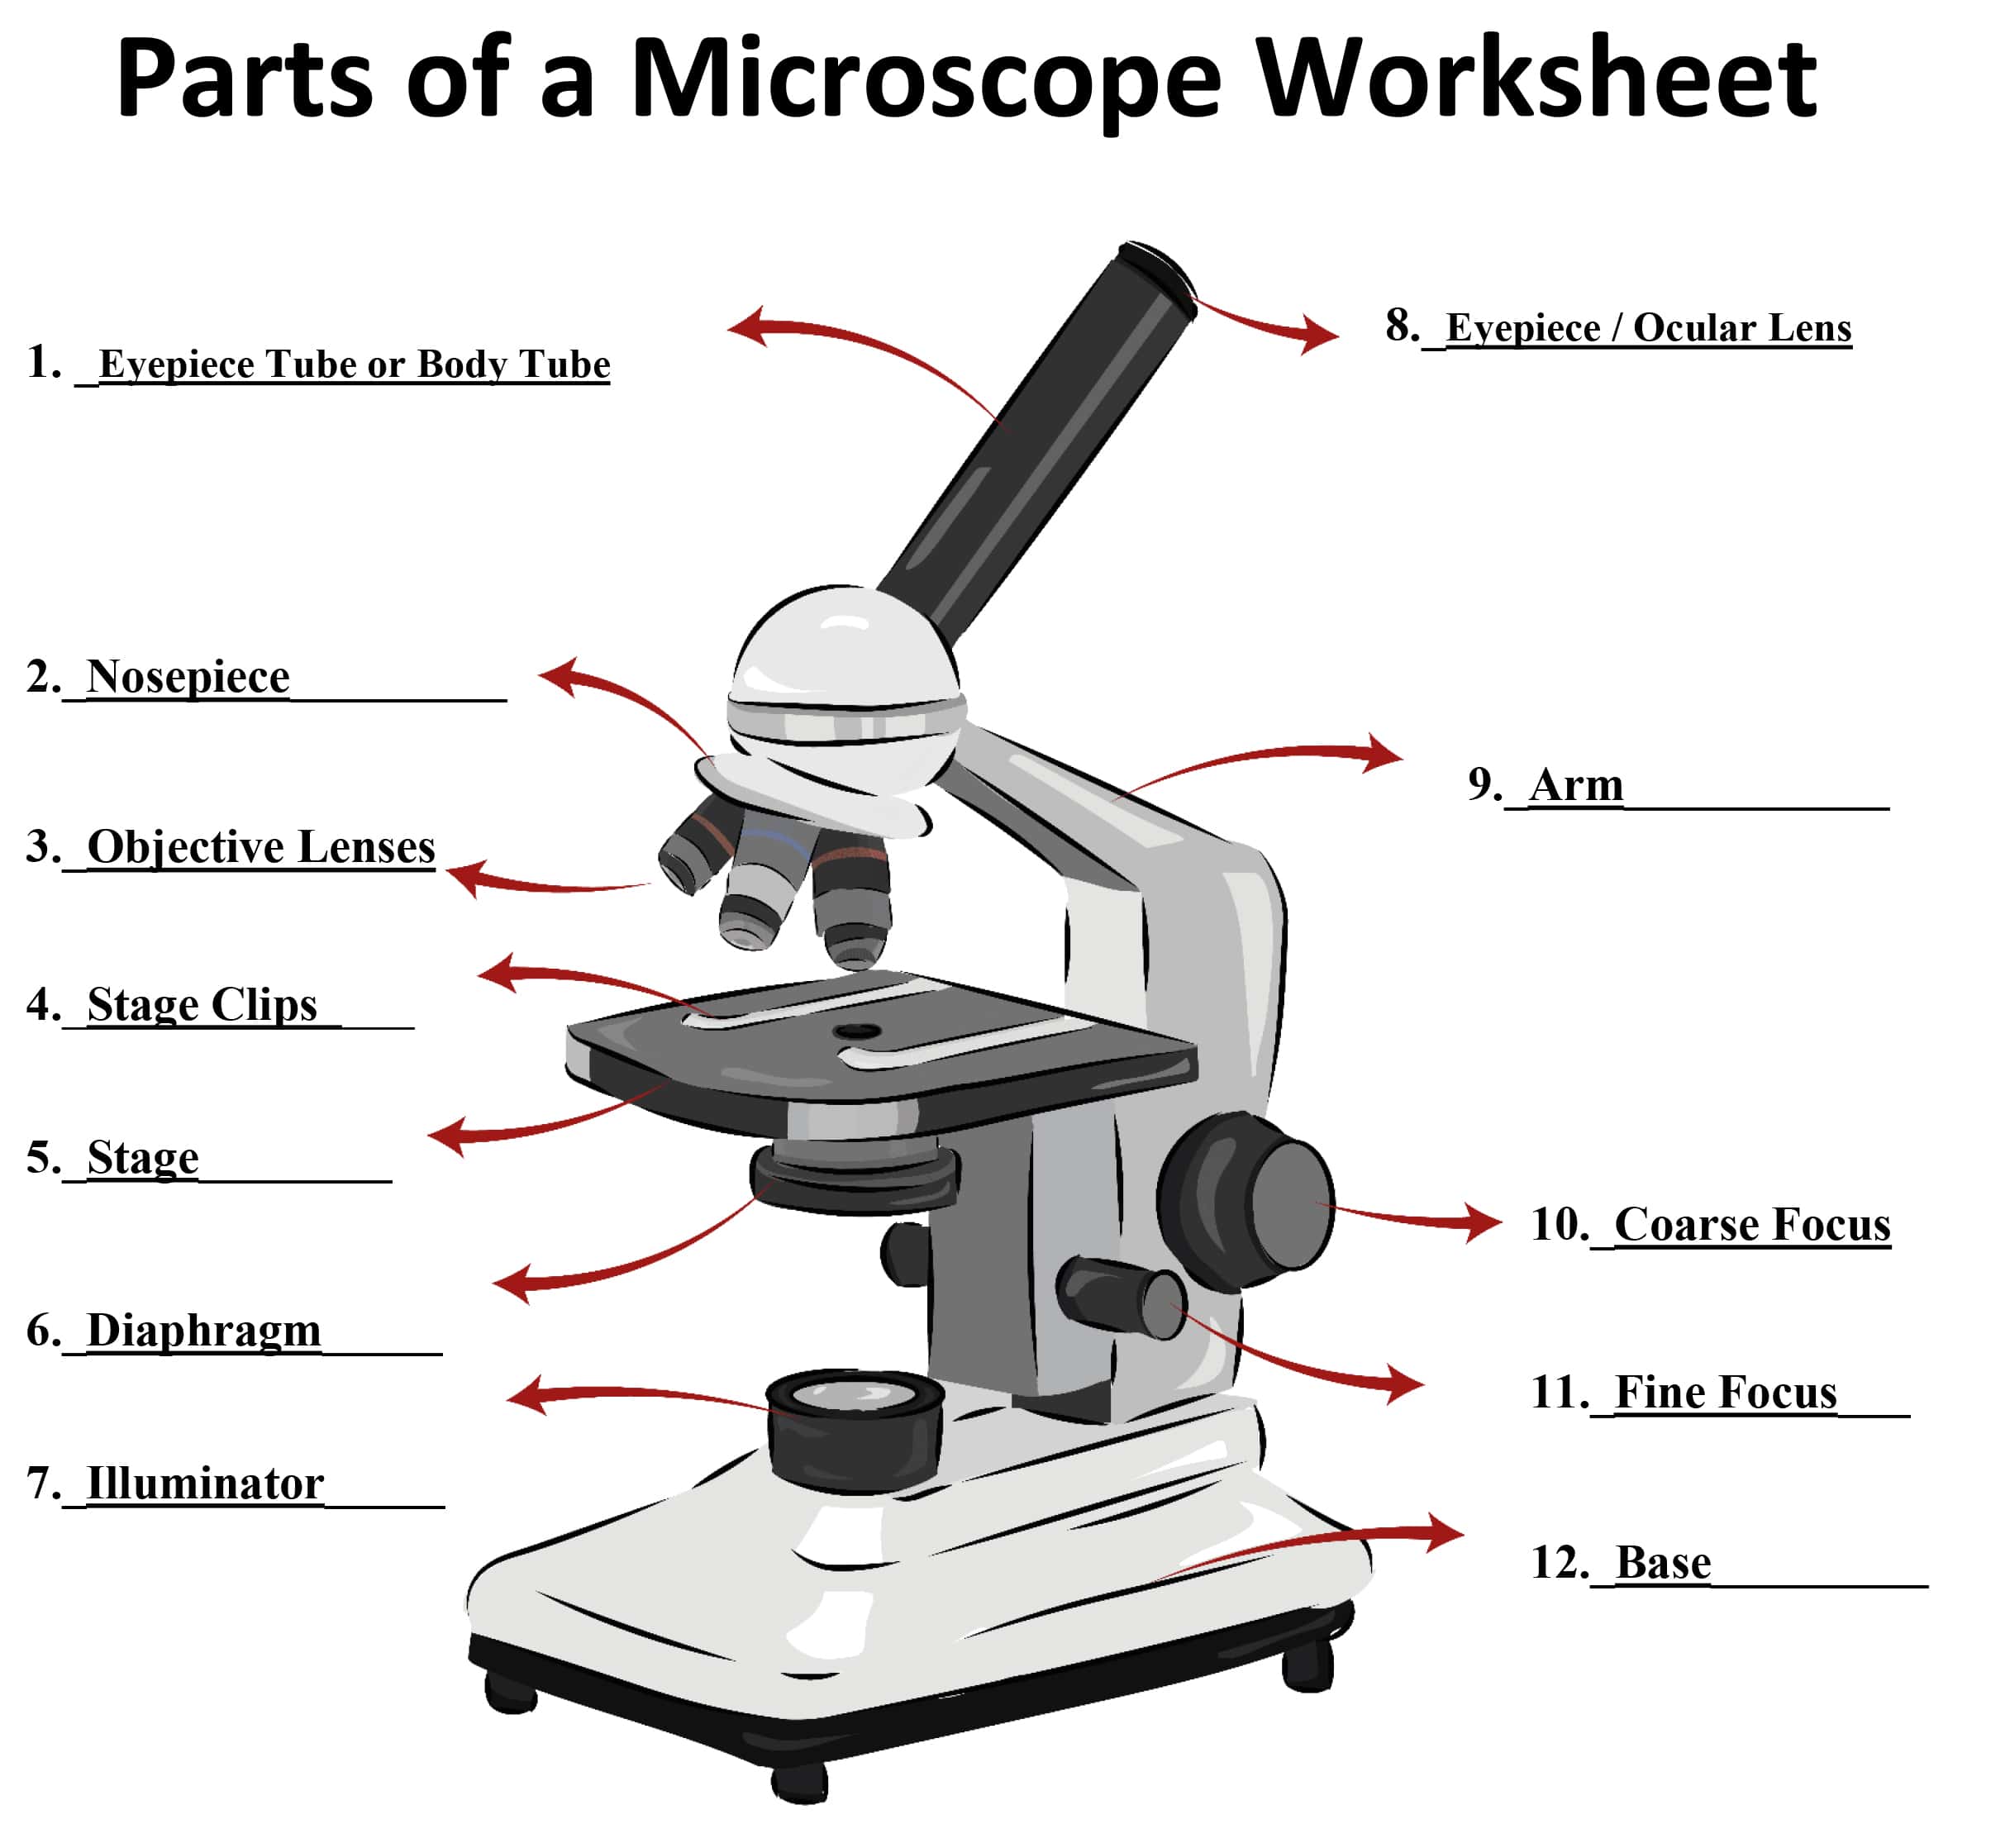 Blog - SmartSchool Systems Throughout Parts Of A Microscope Worksheet